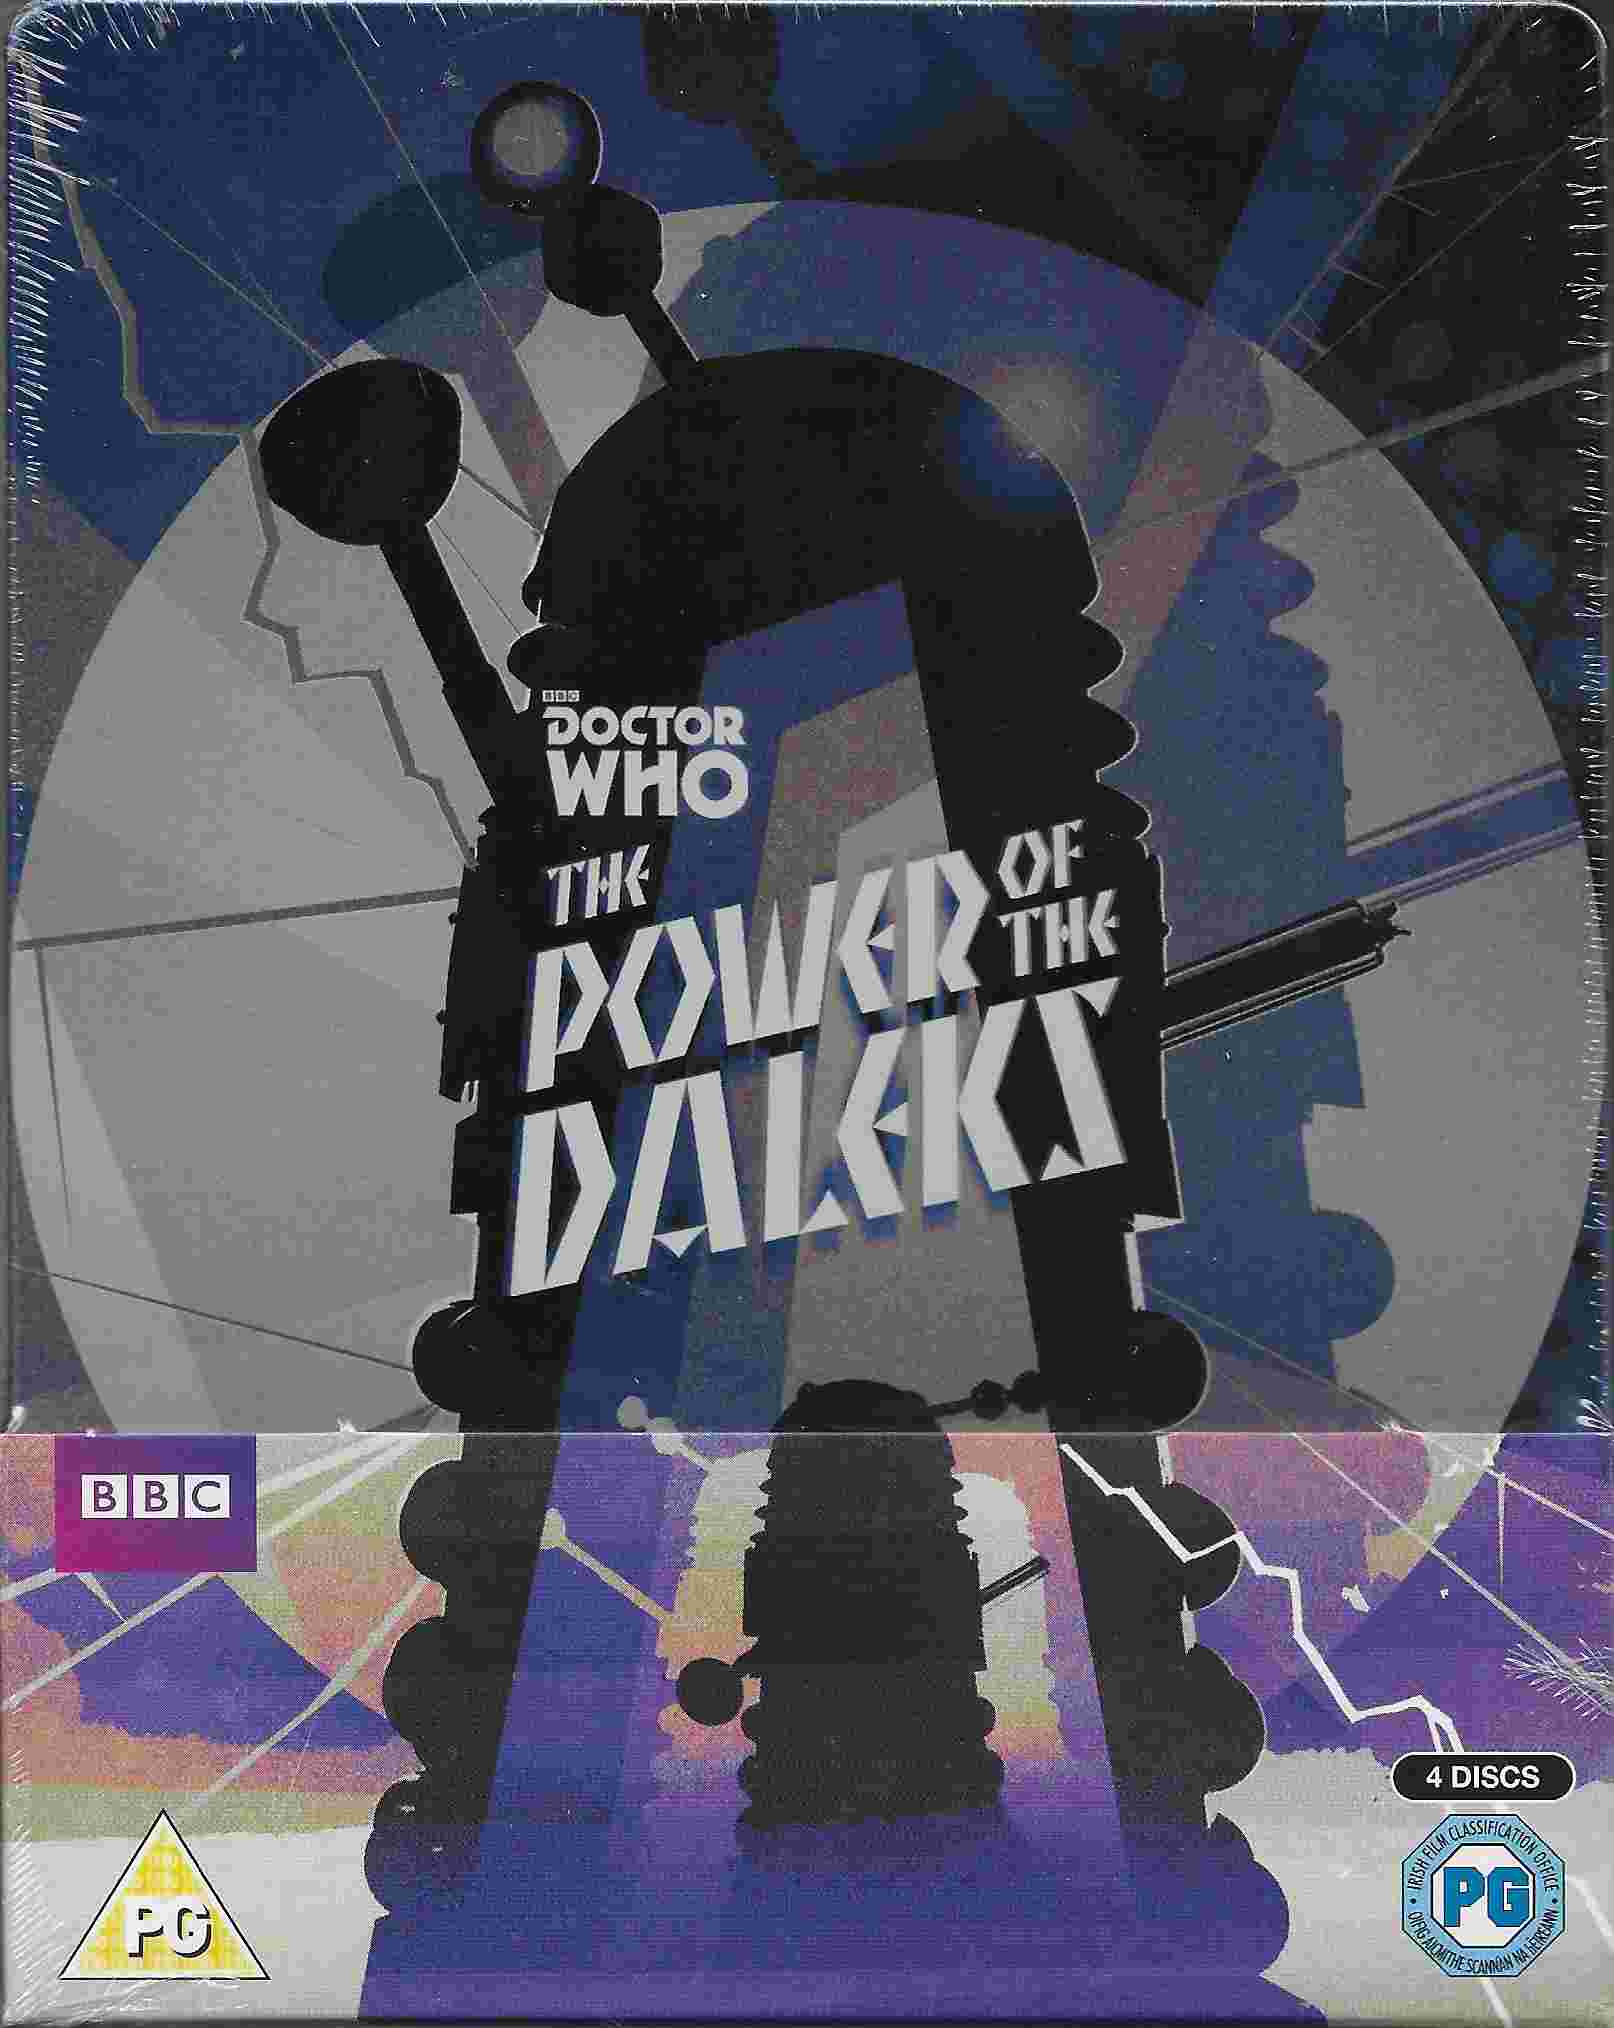 Picture of BBCBD 0390 Doctor Who - The power of the Daleks by artist David Whitaker / Dennis Spooner from the BBC blu-rays - Records and Tapes library